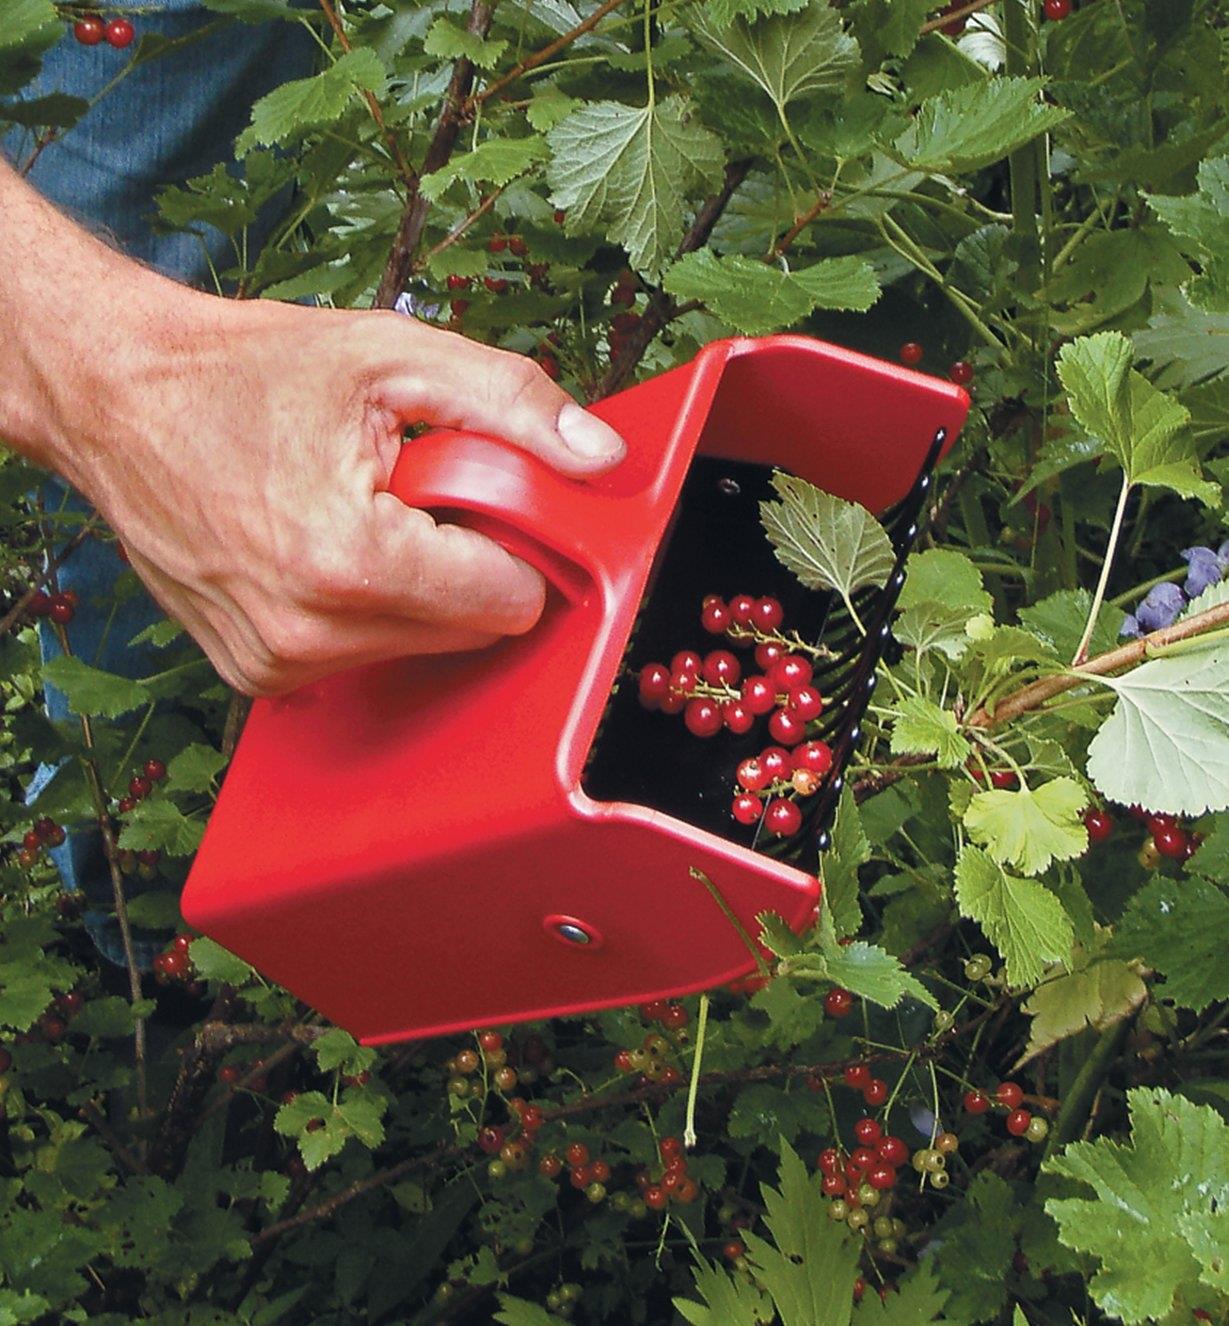 Berry Scoop being used to collect redcurrants